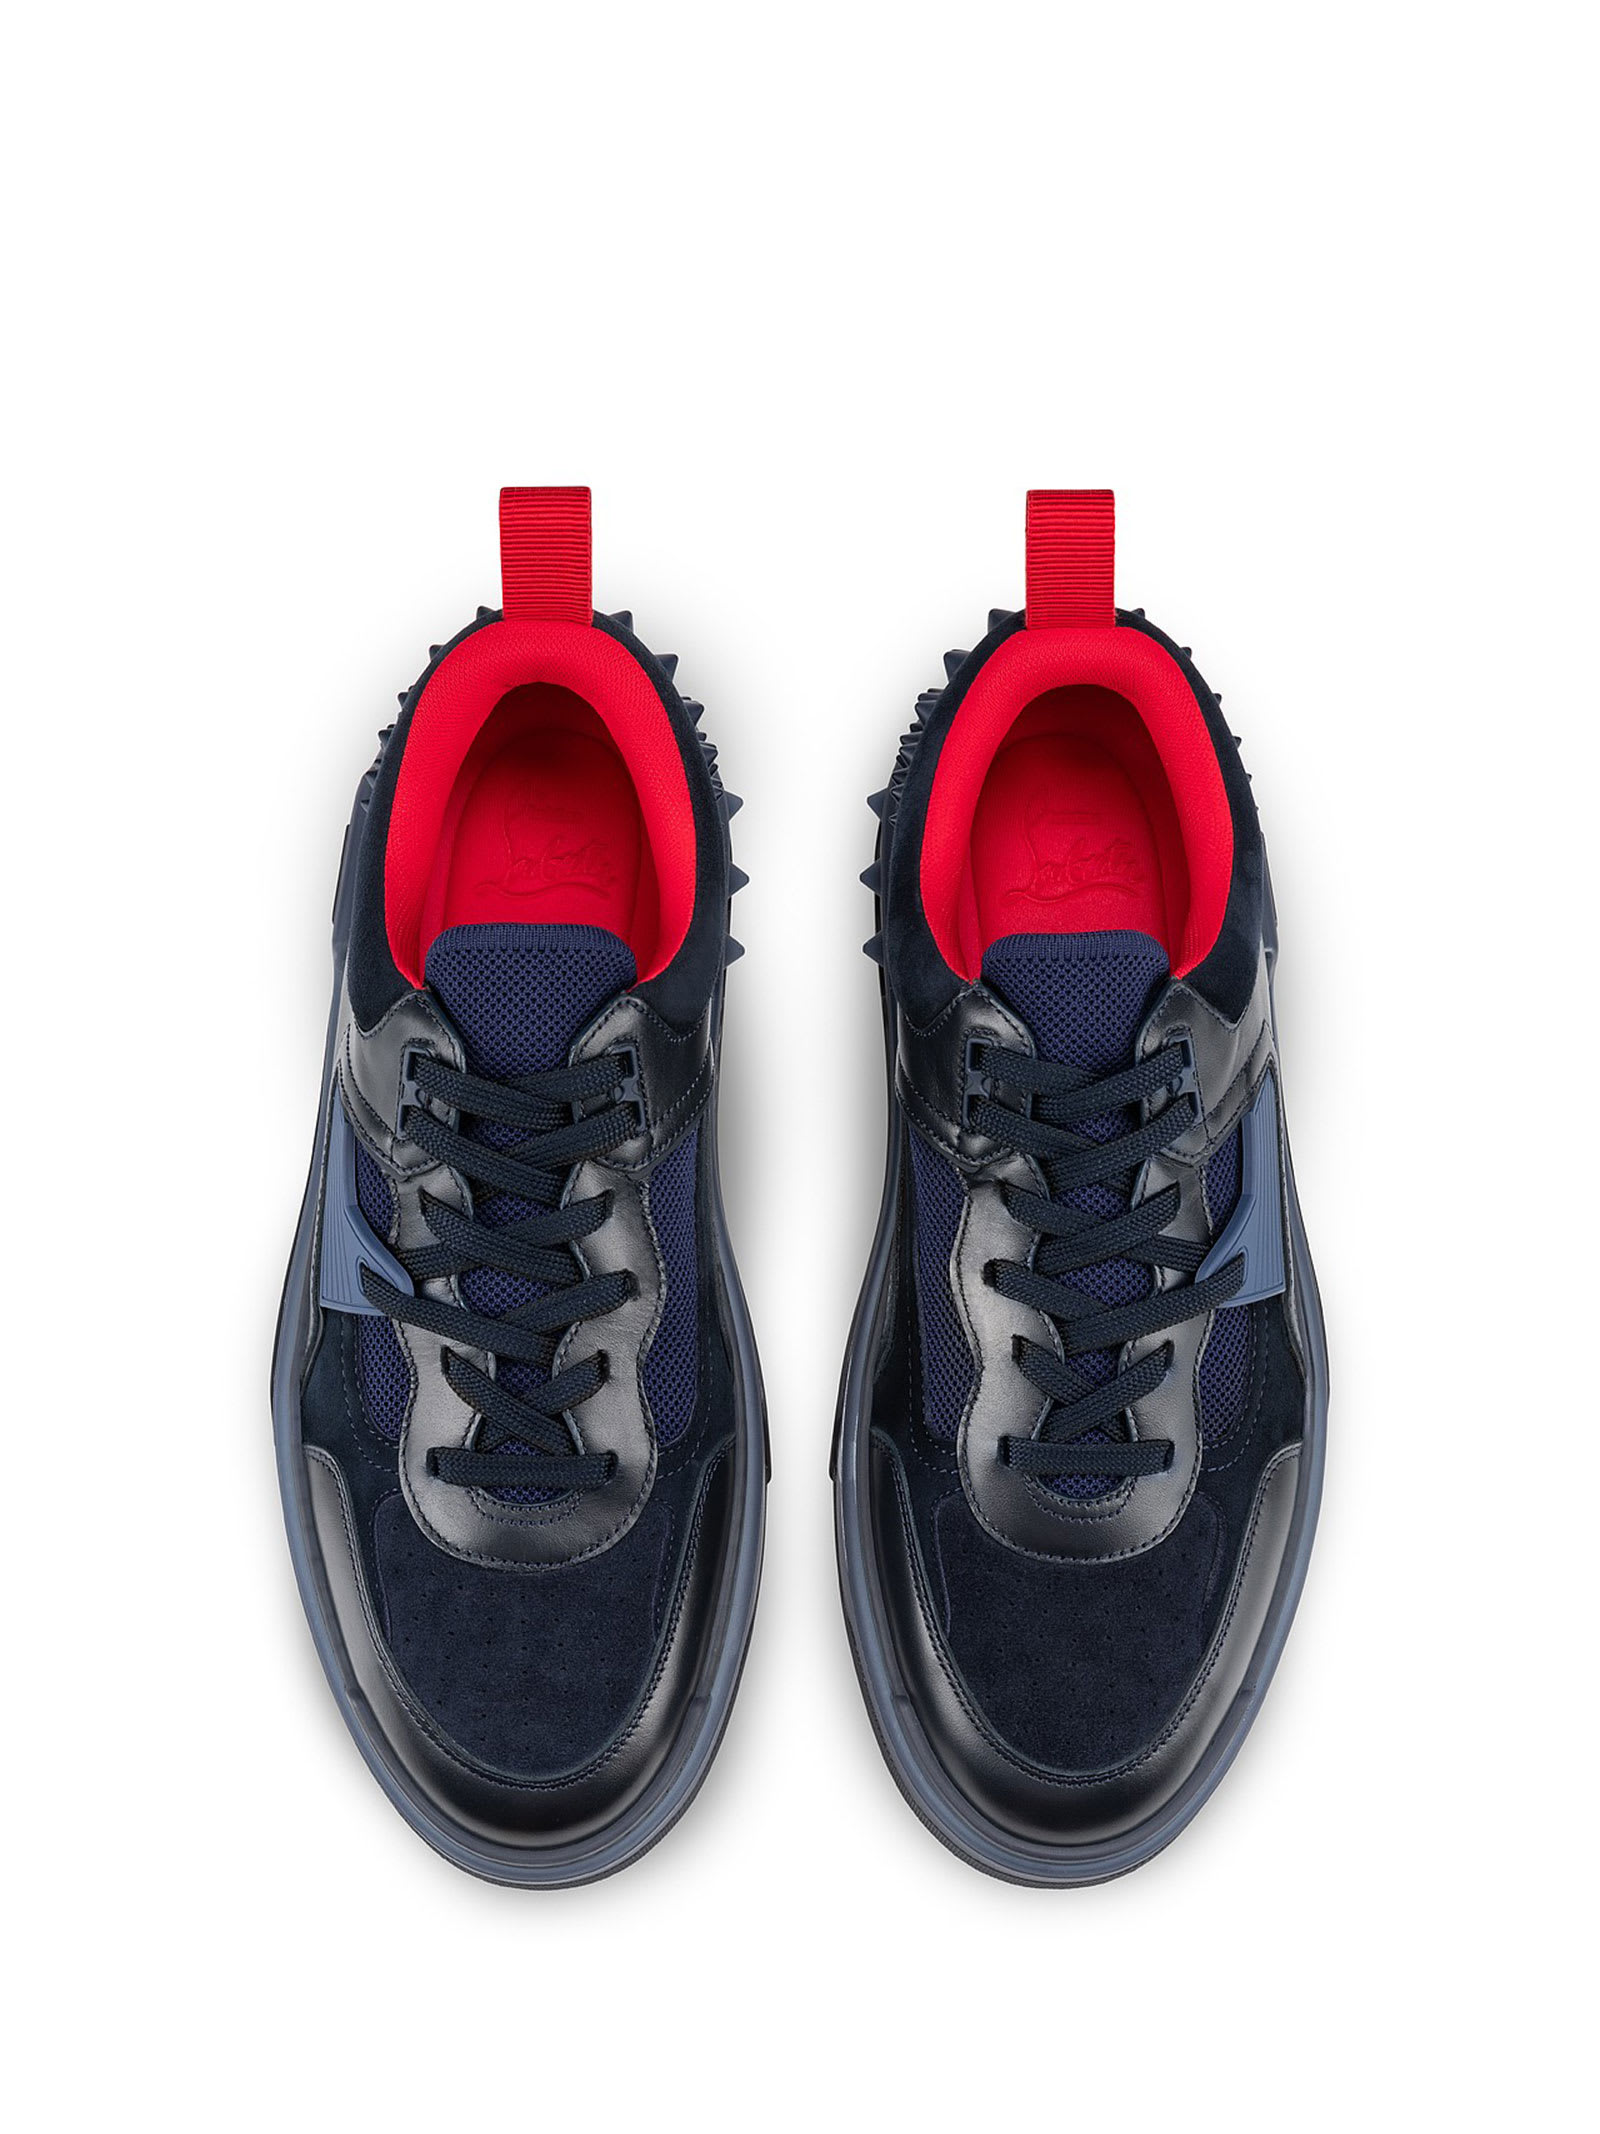 Shop Christian Louboutin Astroloubi Sneakers In Calf Leather And Suede In Marine